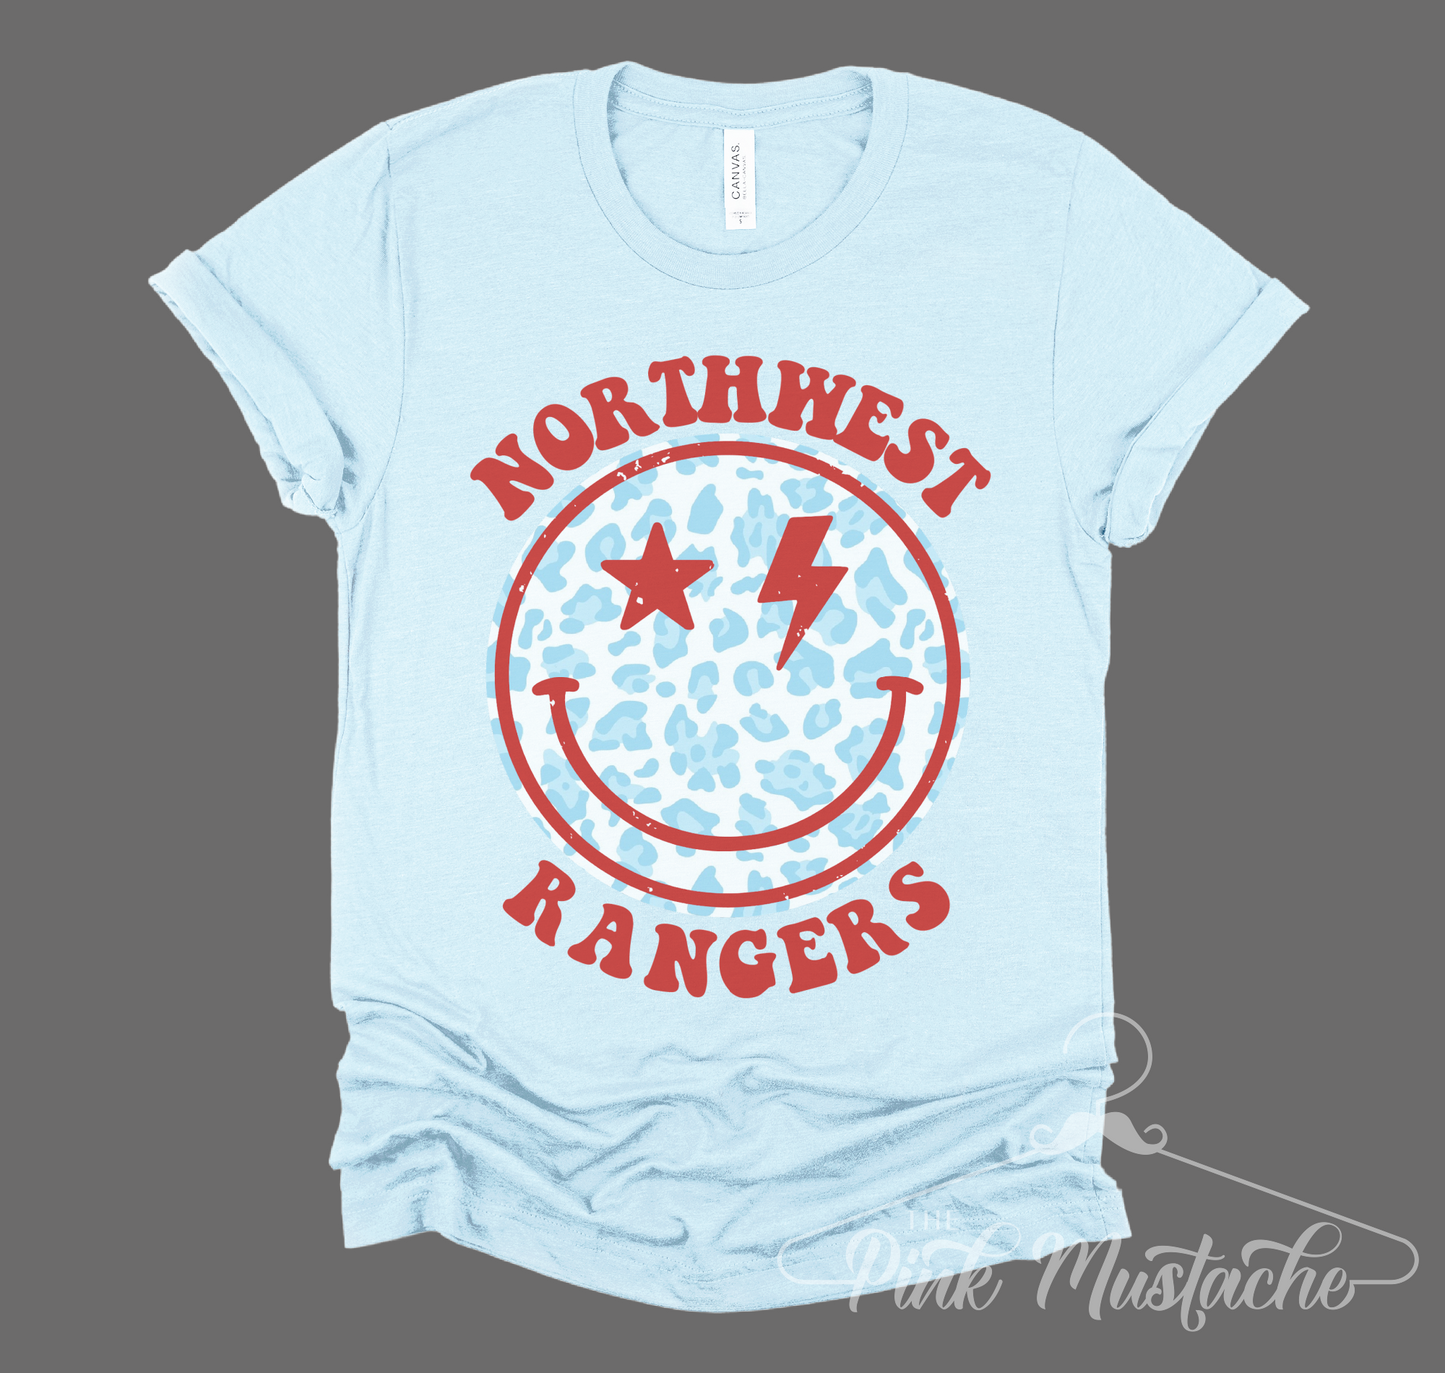 Northwest Rangers Distressed Smiley Unisex Shirt / Toddler, Youth, and Adult Sizes/ Lewisburg -Desoto County Schools / Mississippi School Shirt